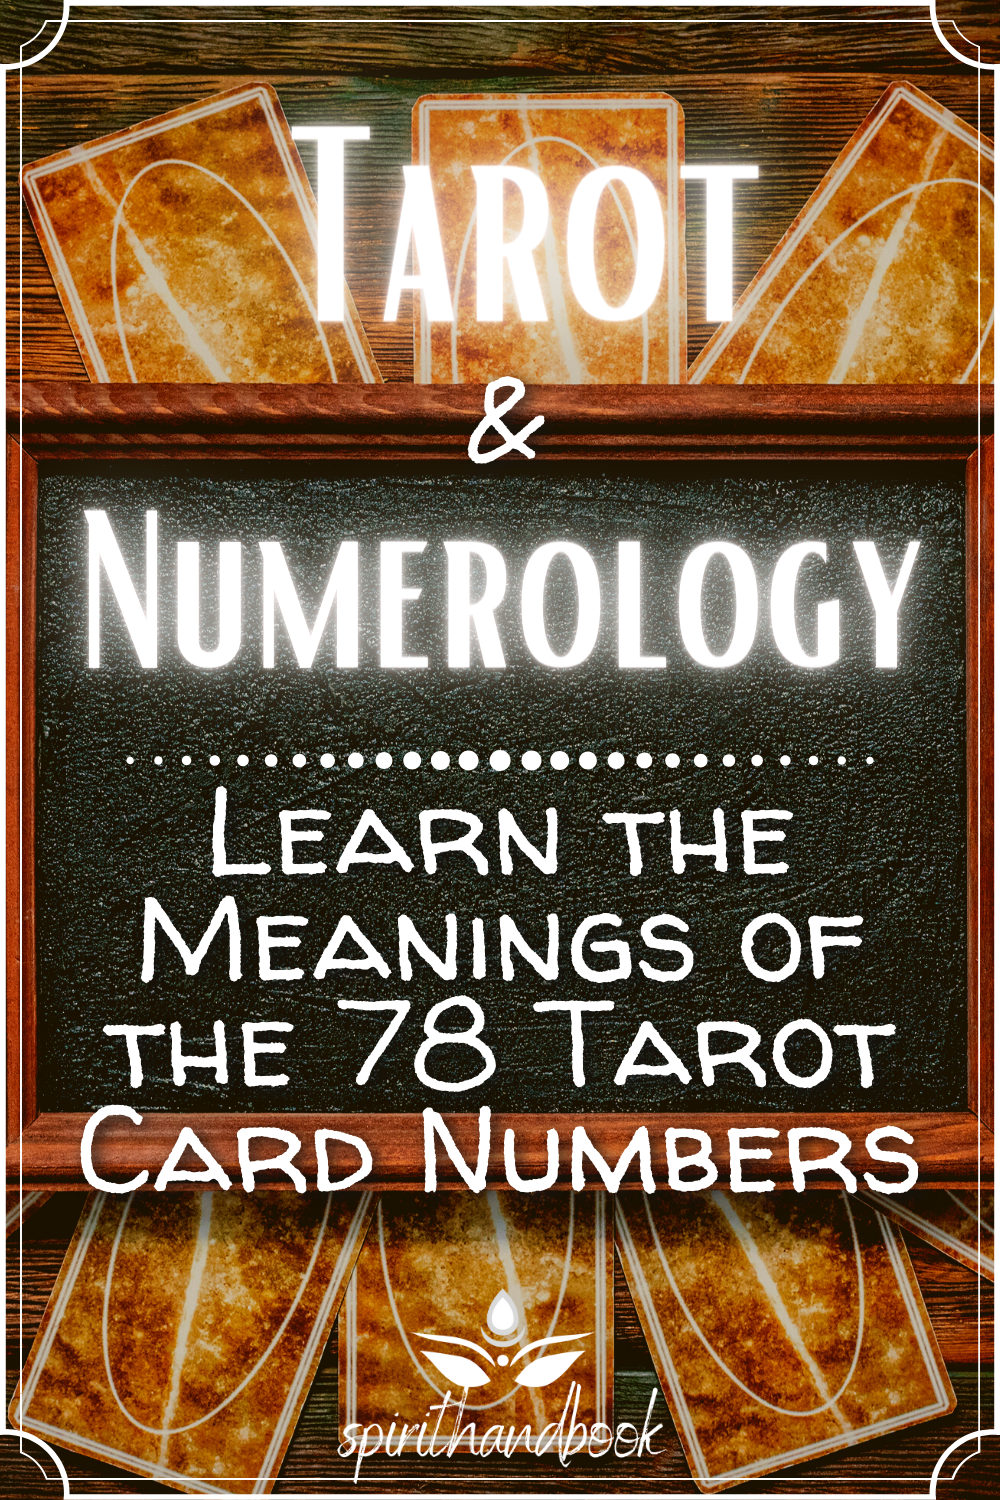 You are currently viewing Tarot and Numerology Guide: Learn the Meanings of the 78 Tarot Card Numbers